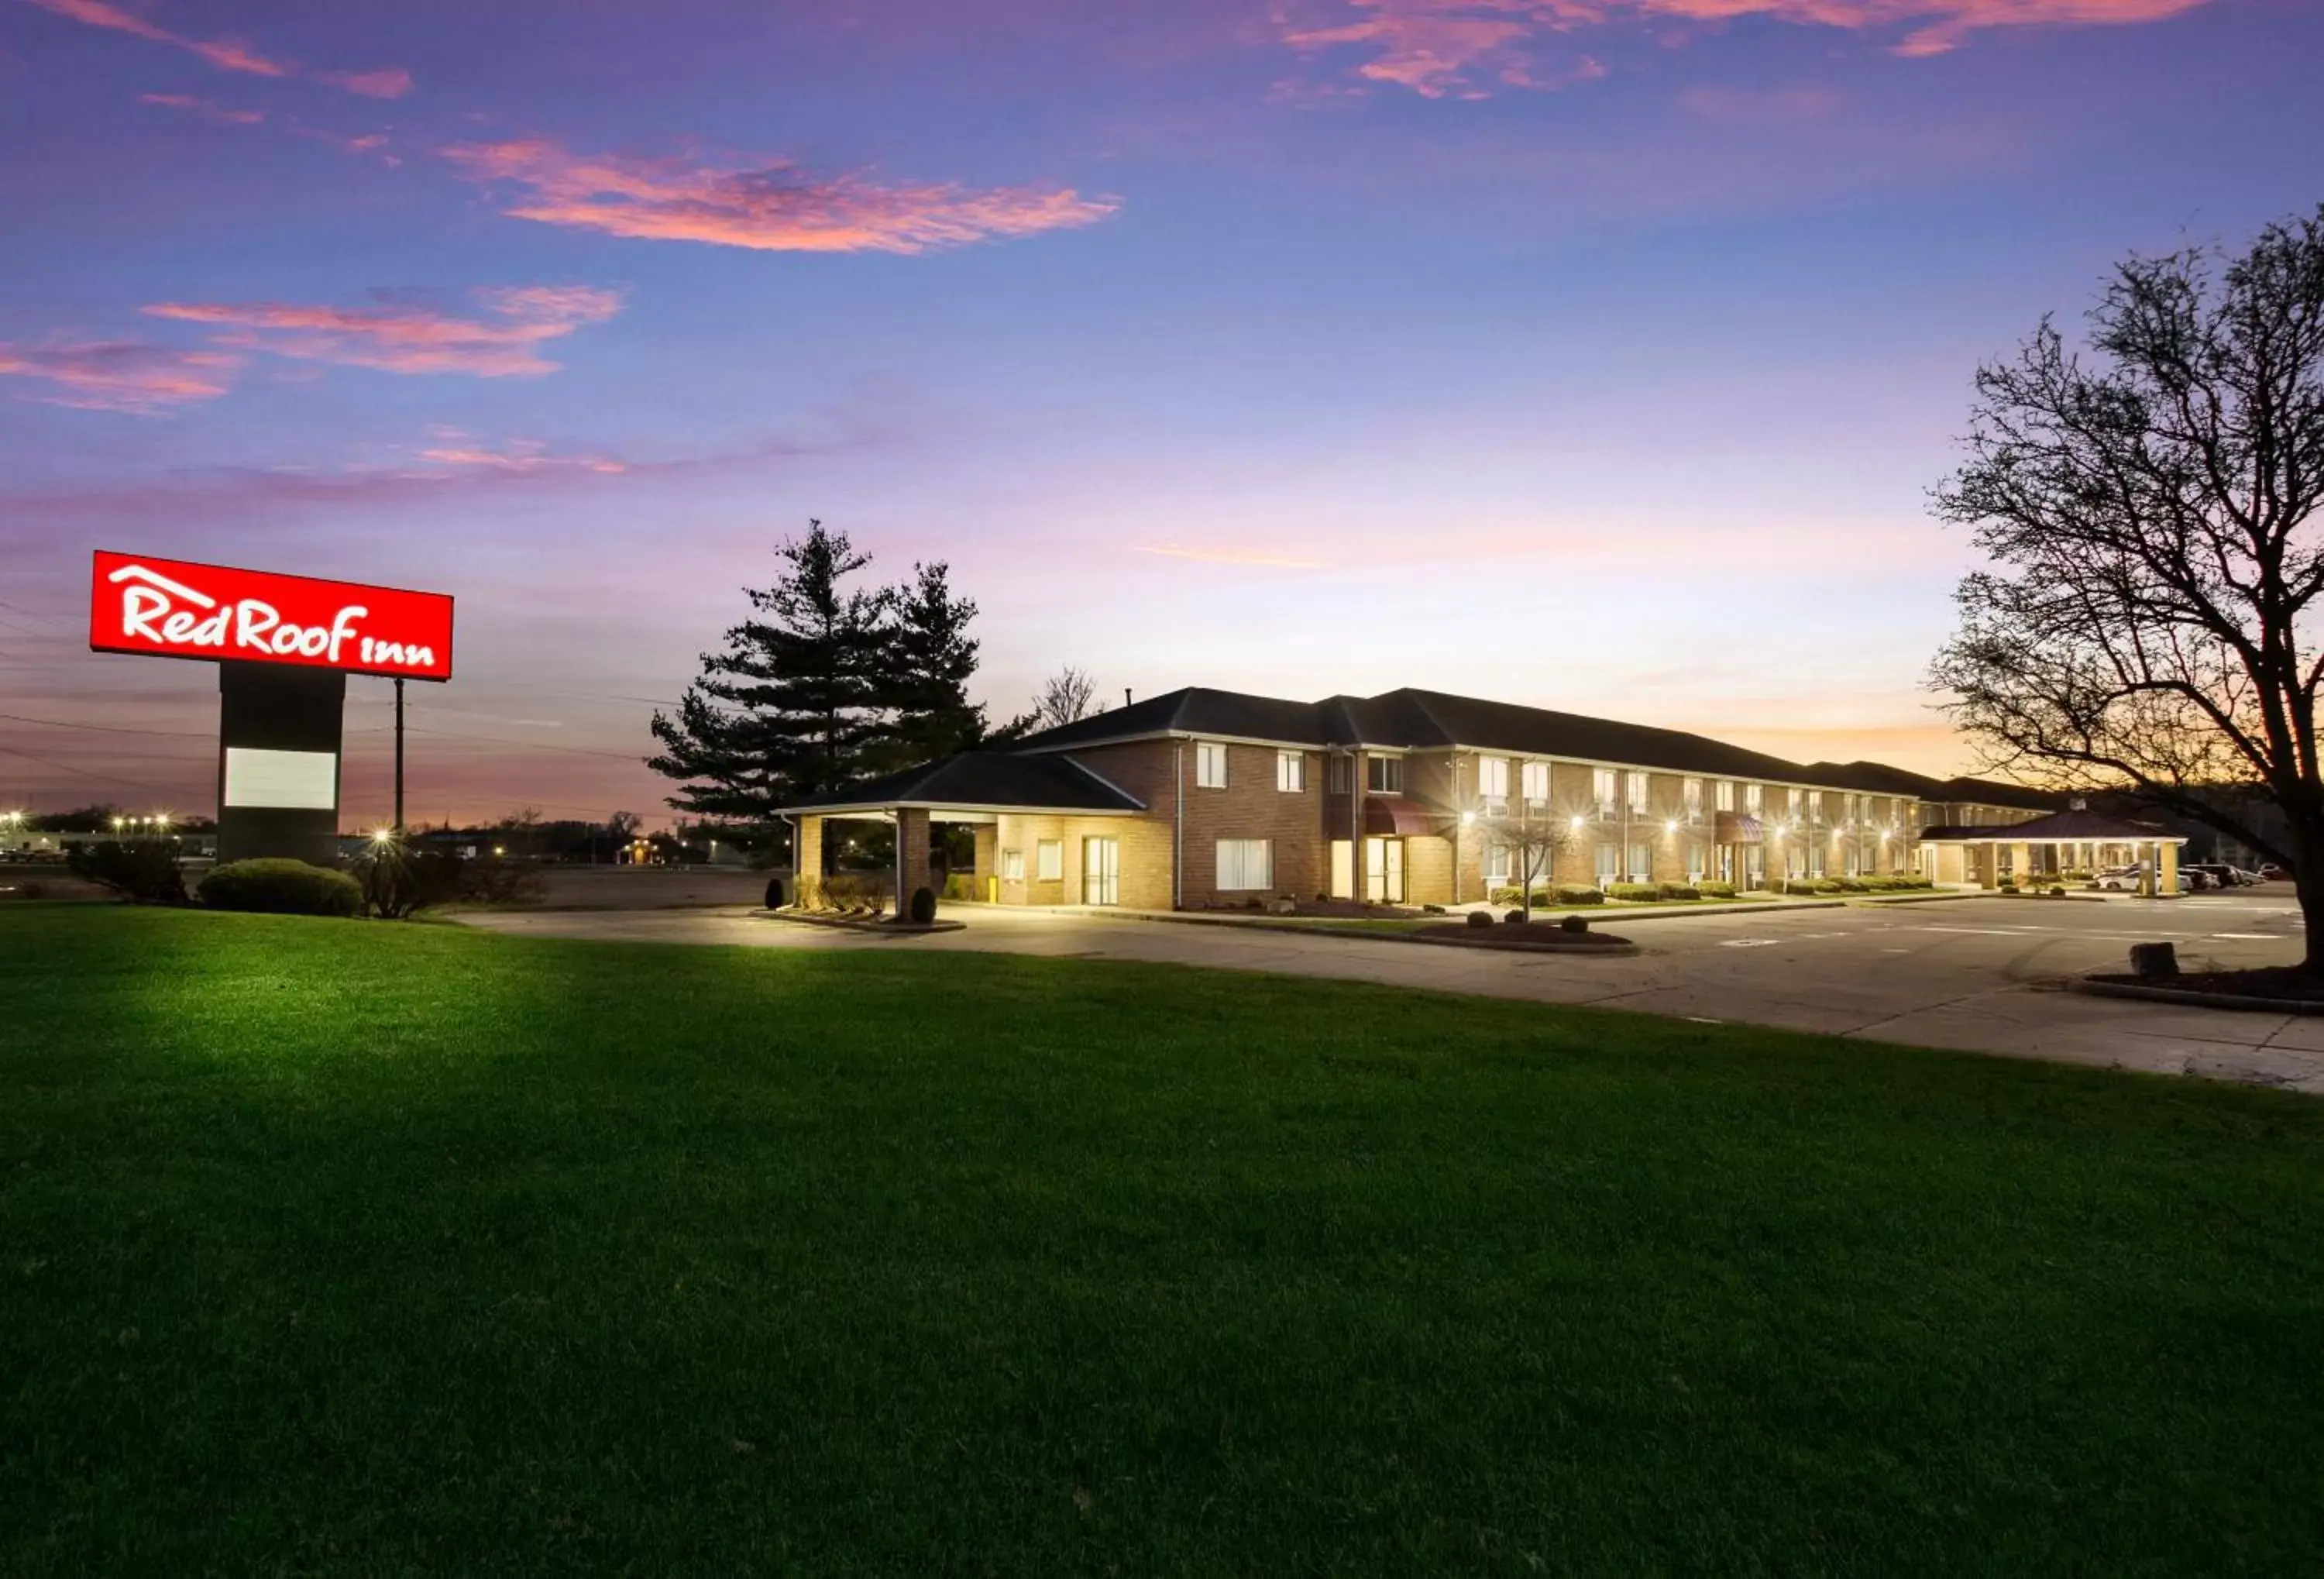 Property Building in Red Roof Inn Lawrenceburg